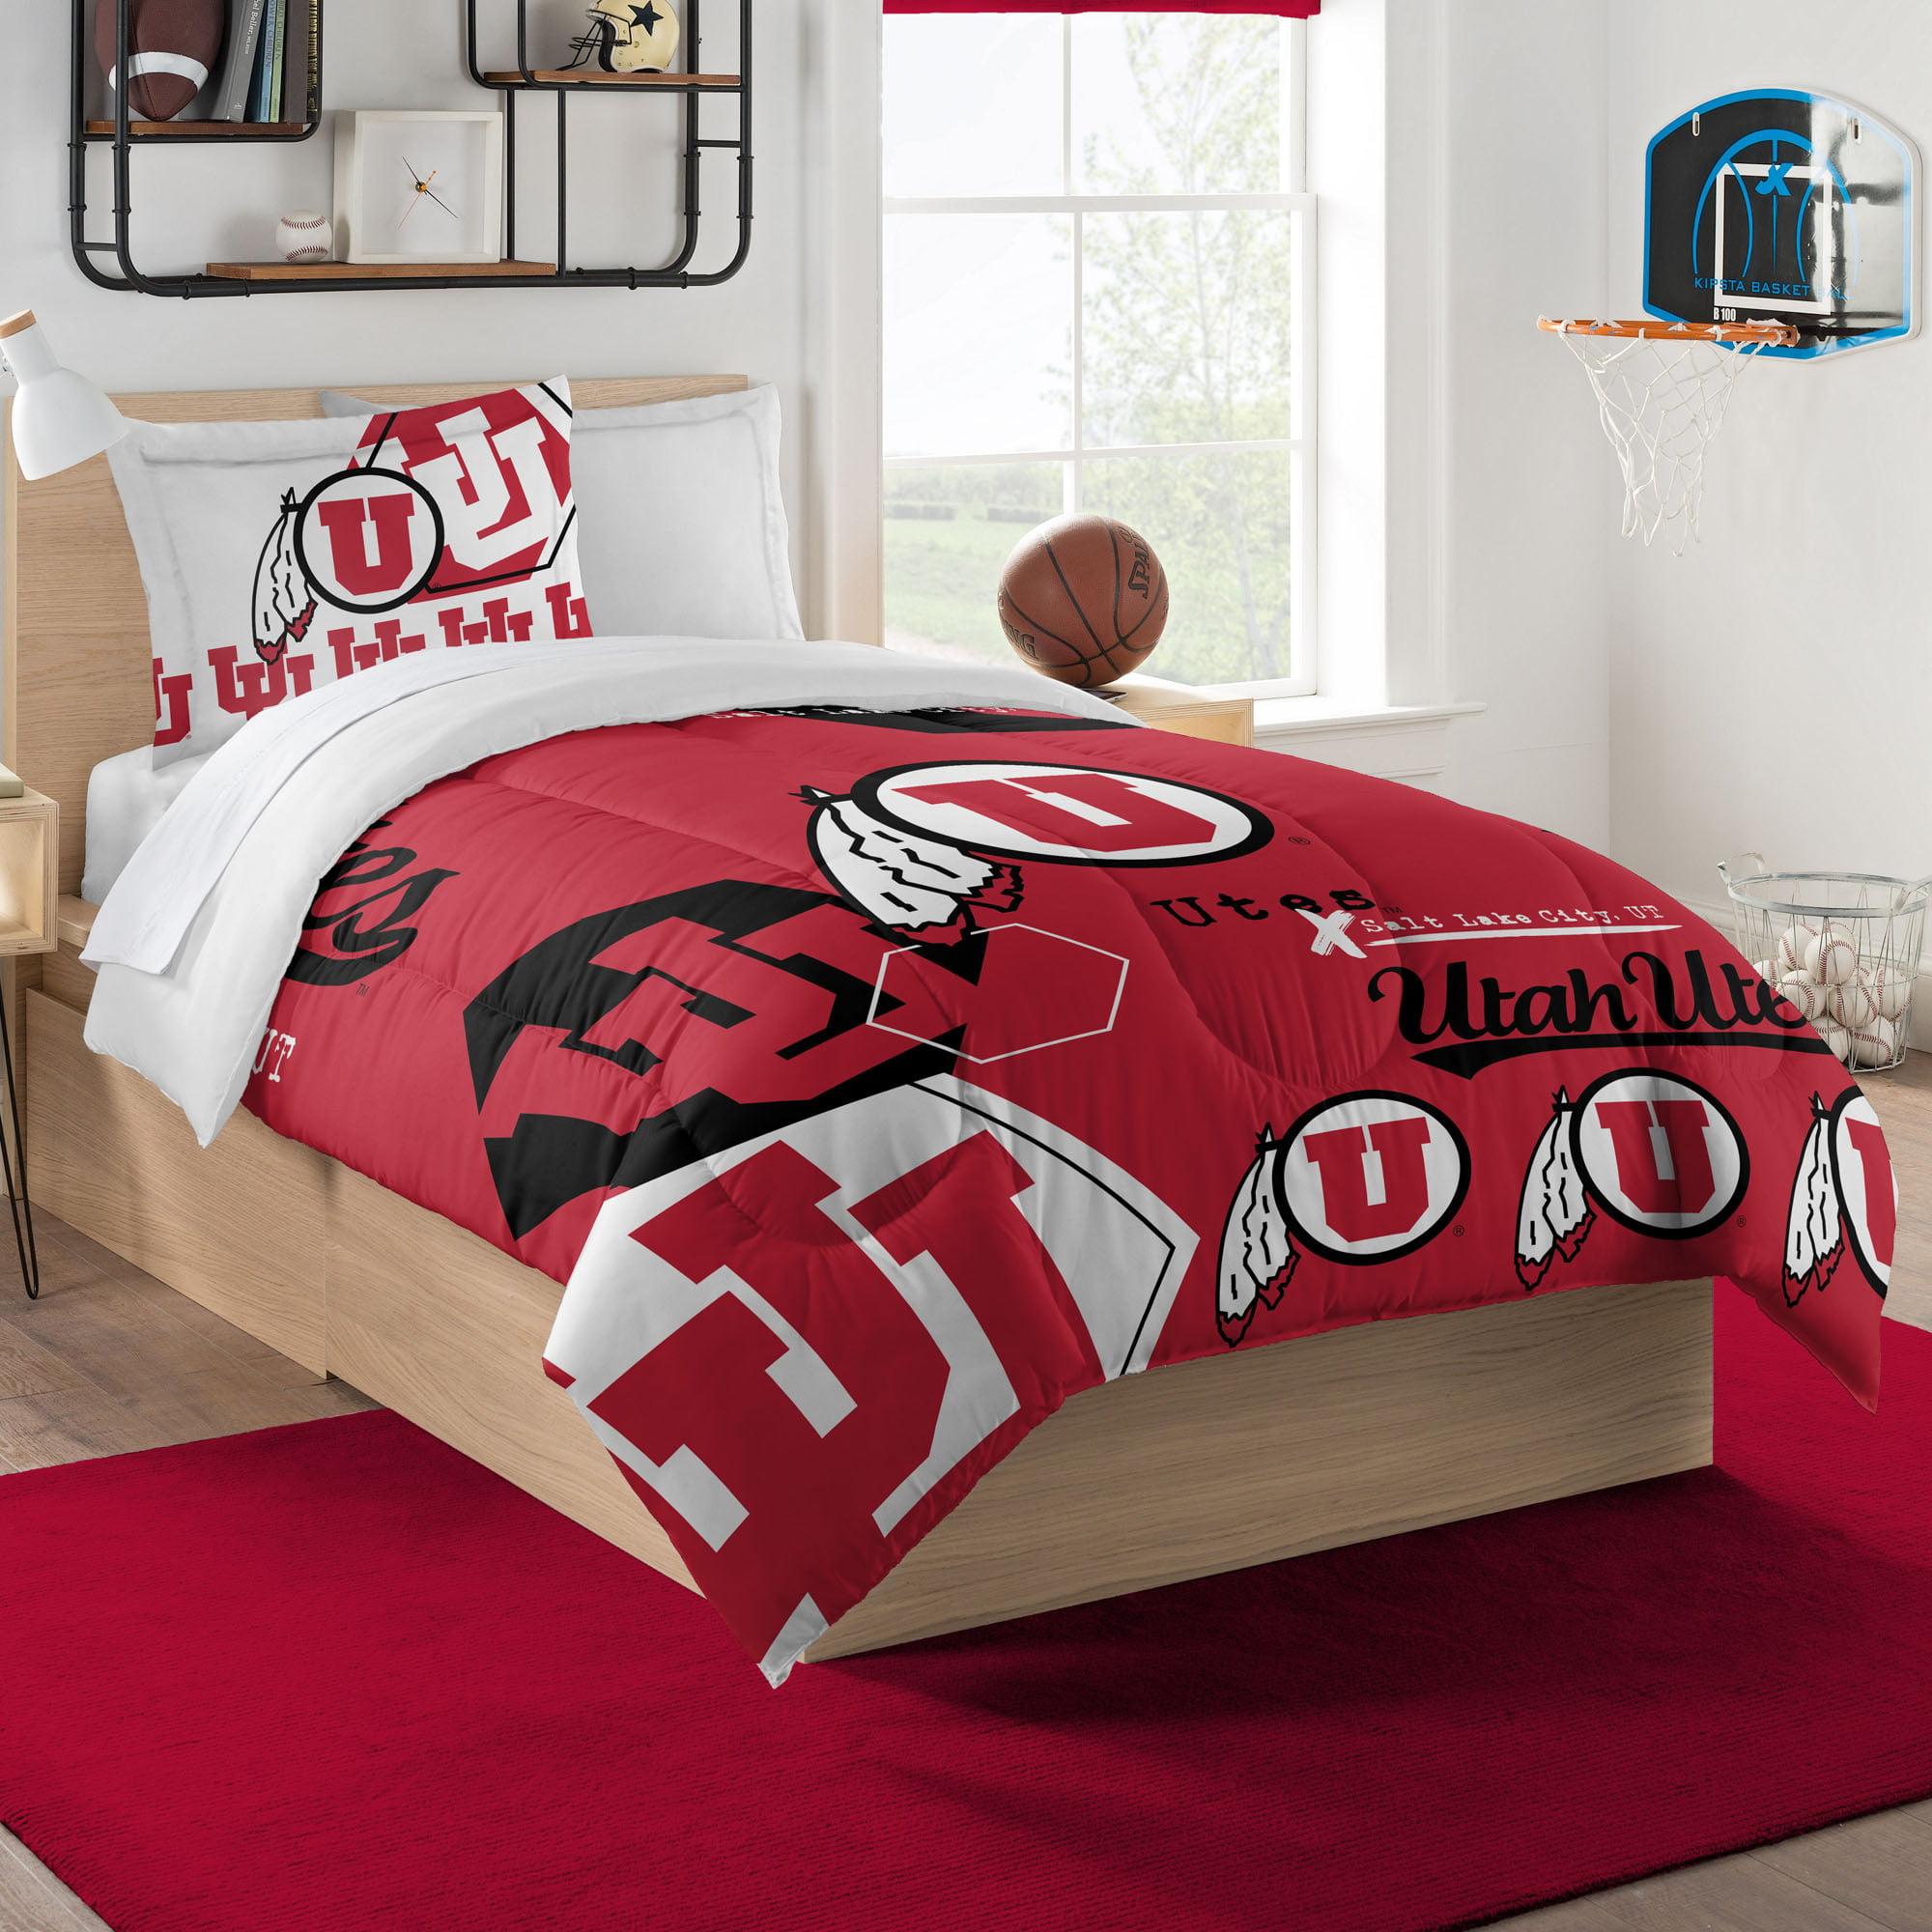 Details about   Blanket Fleece Throw NCAA Utah Utes NEW 50”x60” with protective sleeve 